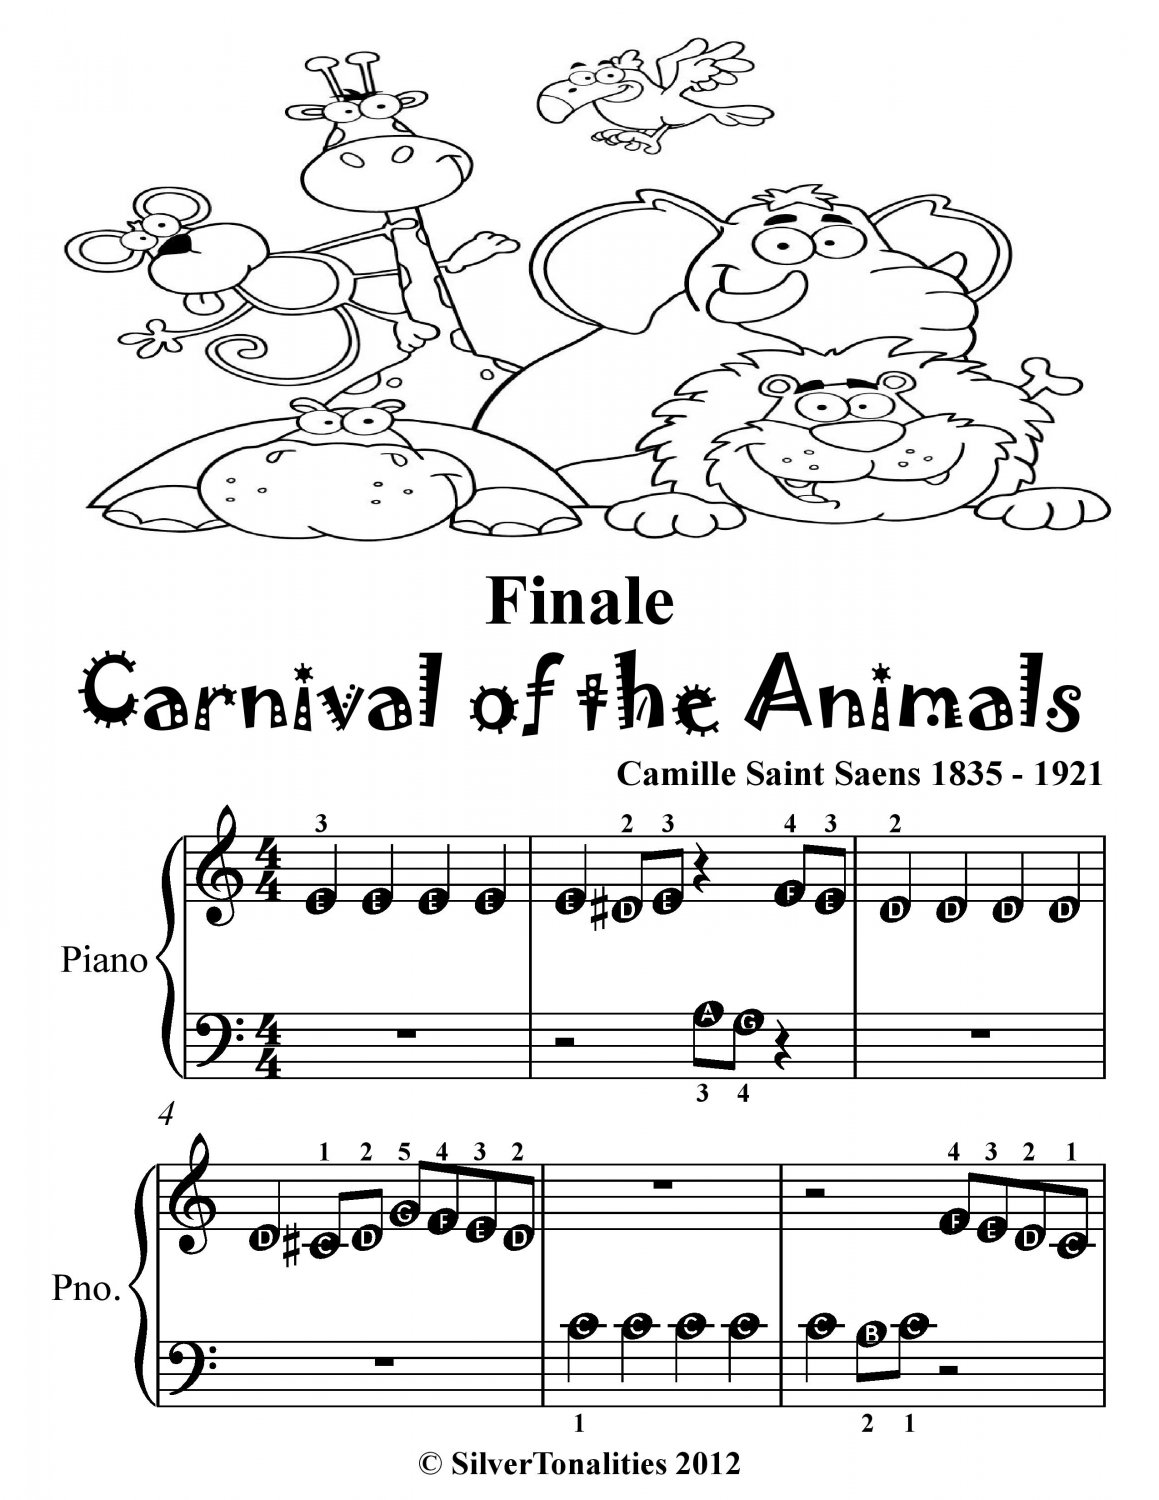 finale-carnival-of-the-animals-beginner-piano-sheet-music-tadpole